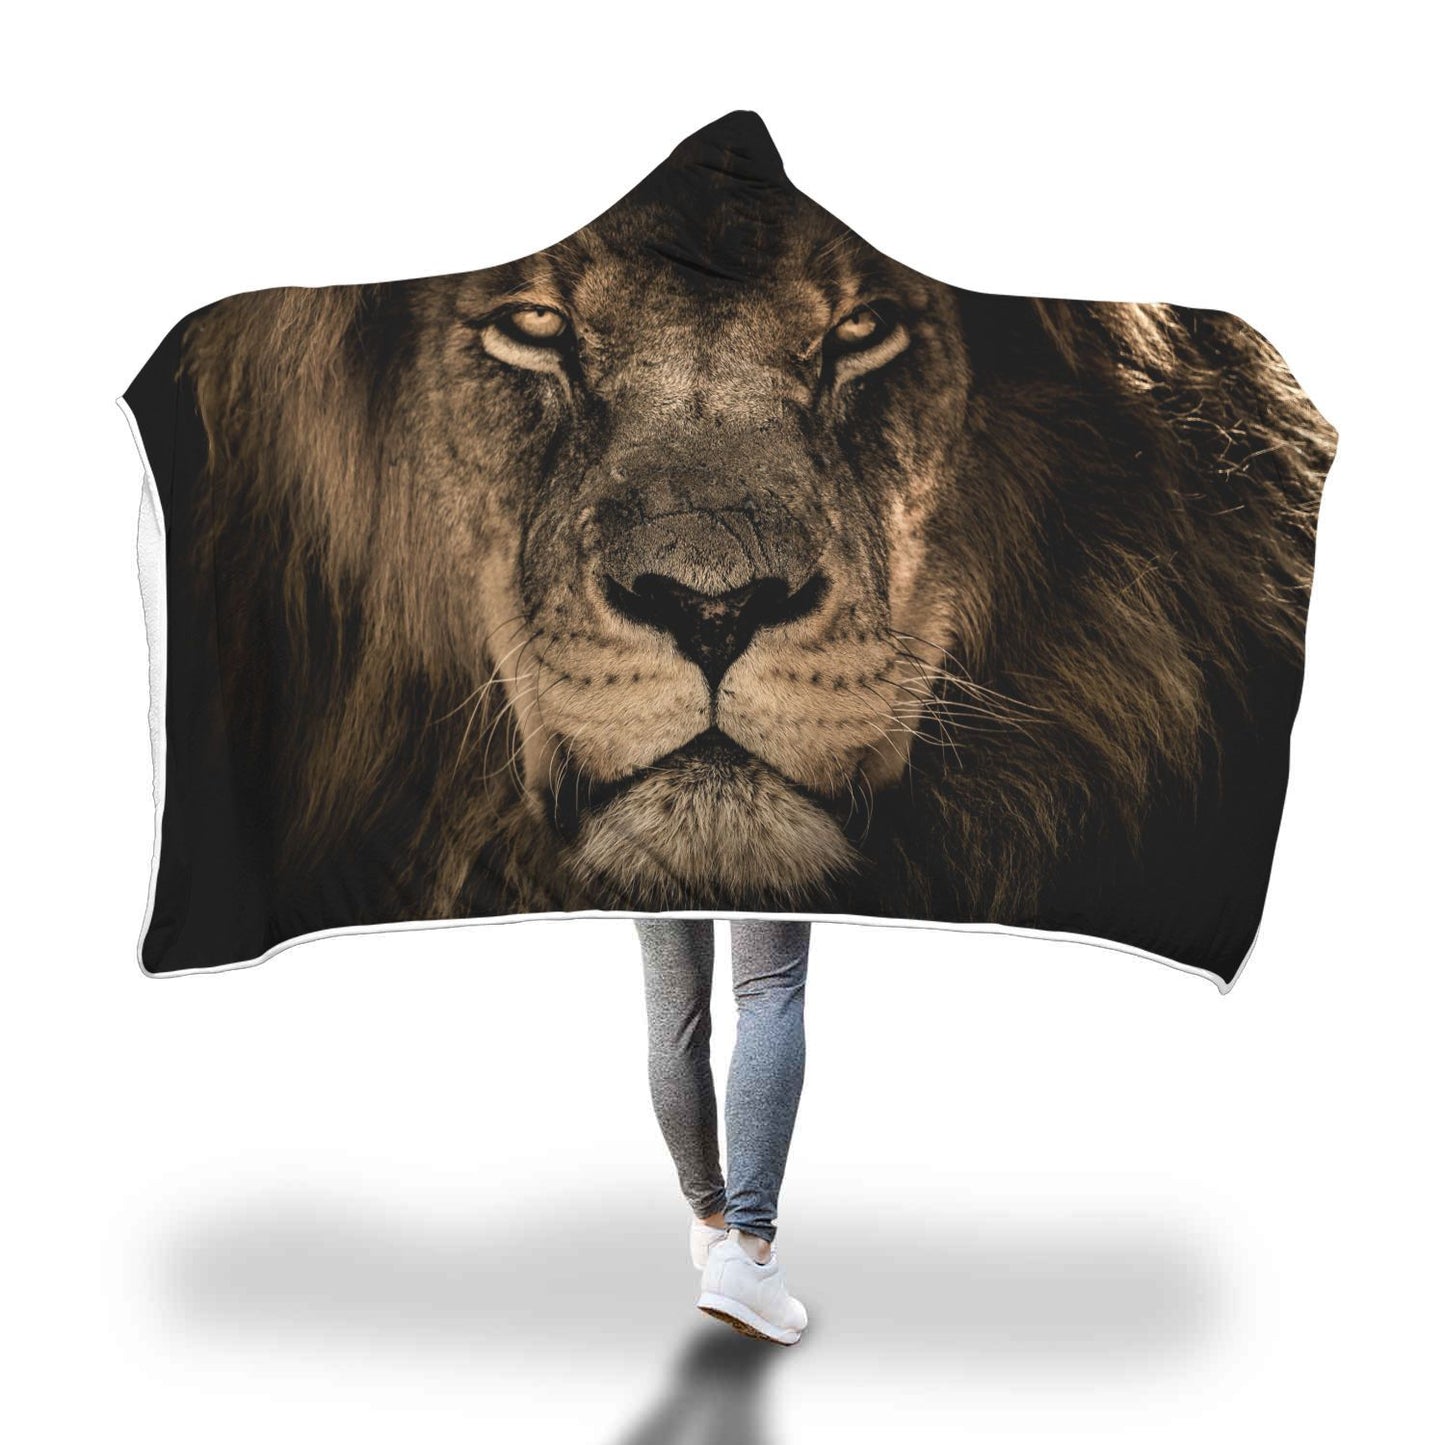 Fearless Lion Hooded Blanket - Perfenq